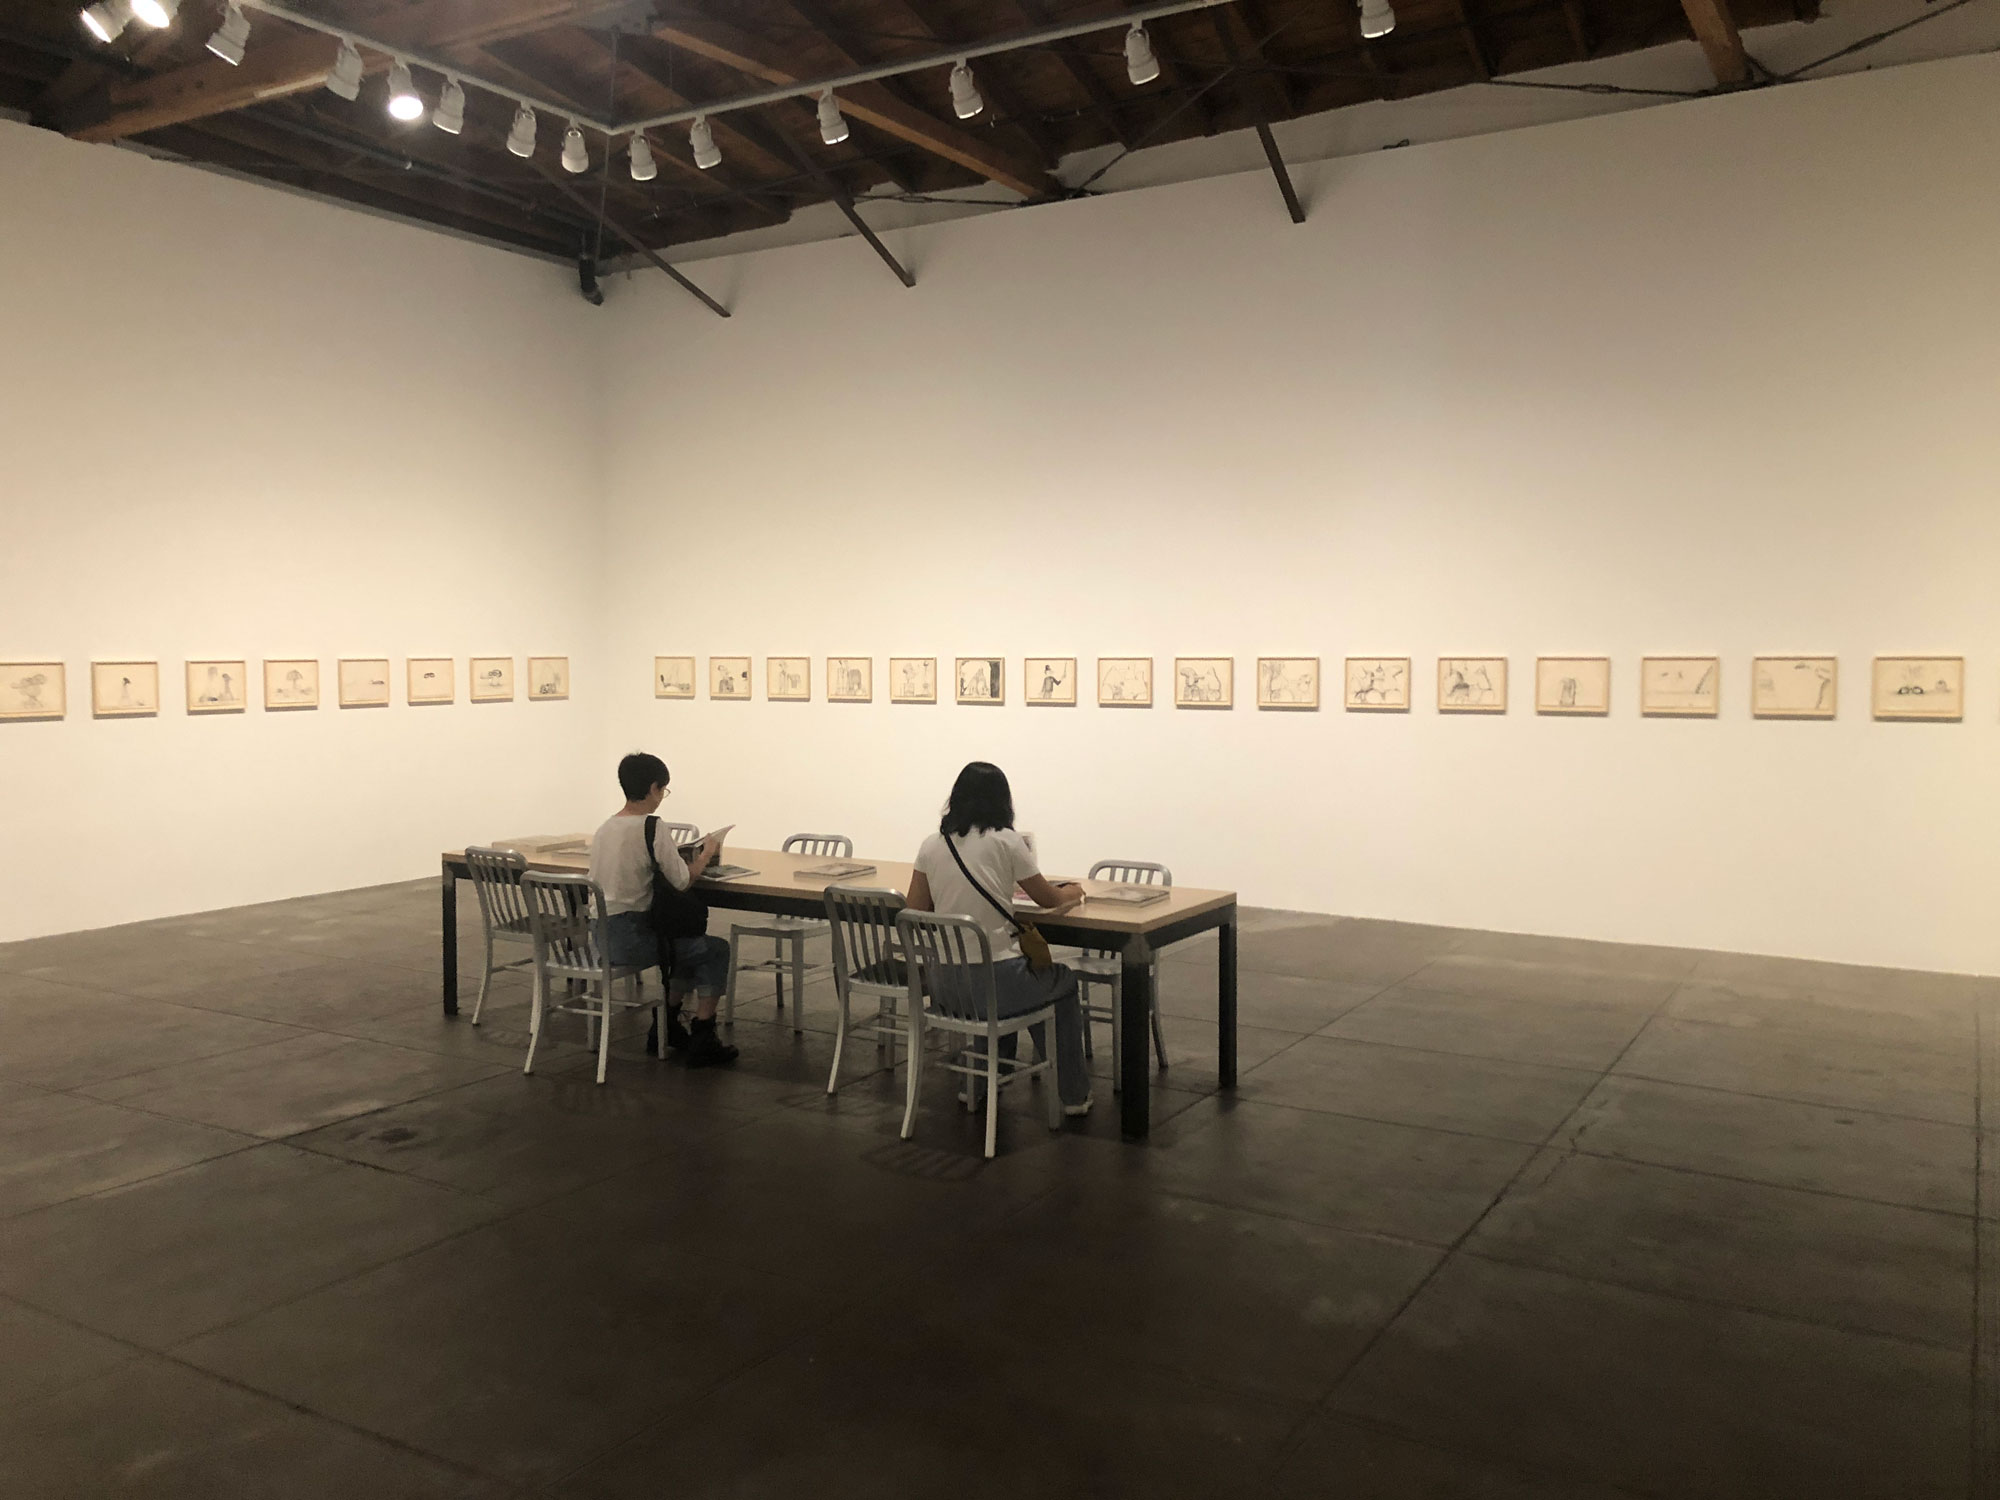 In Sep 2019, Hauser & Wirth, a modern art gallery located in East Los Angeles, held an exhibition:" Resilience - Philip Guston in 1971".